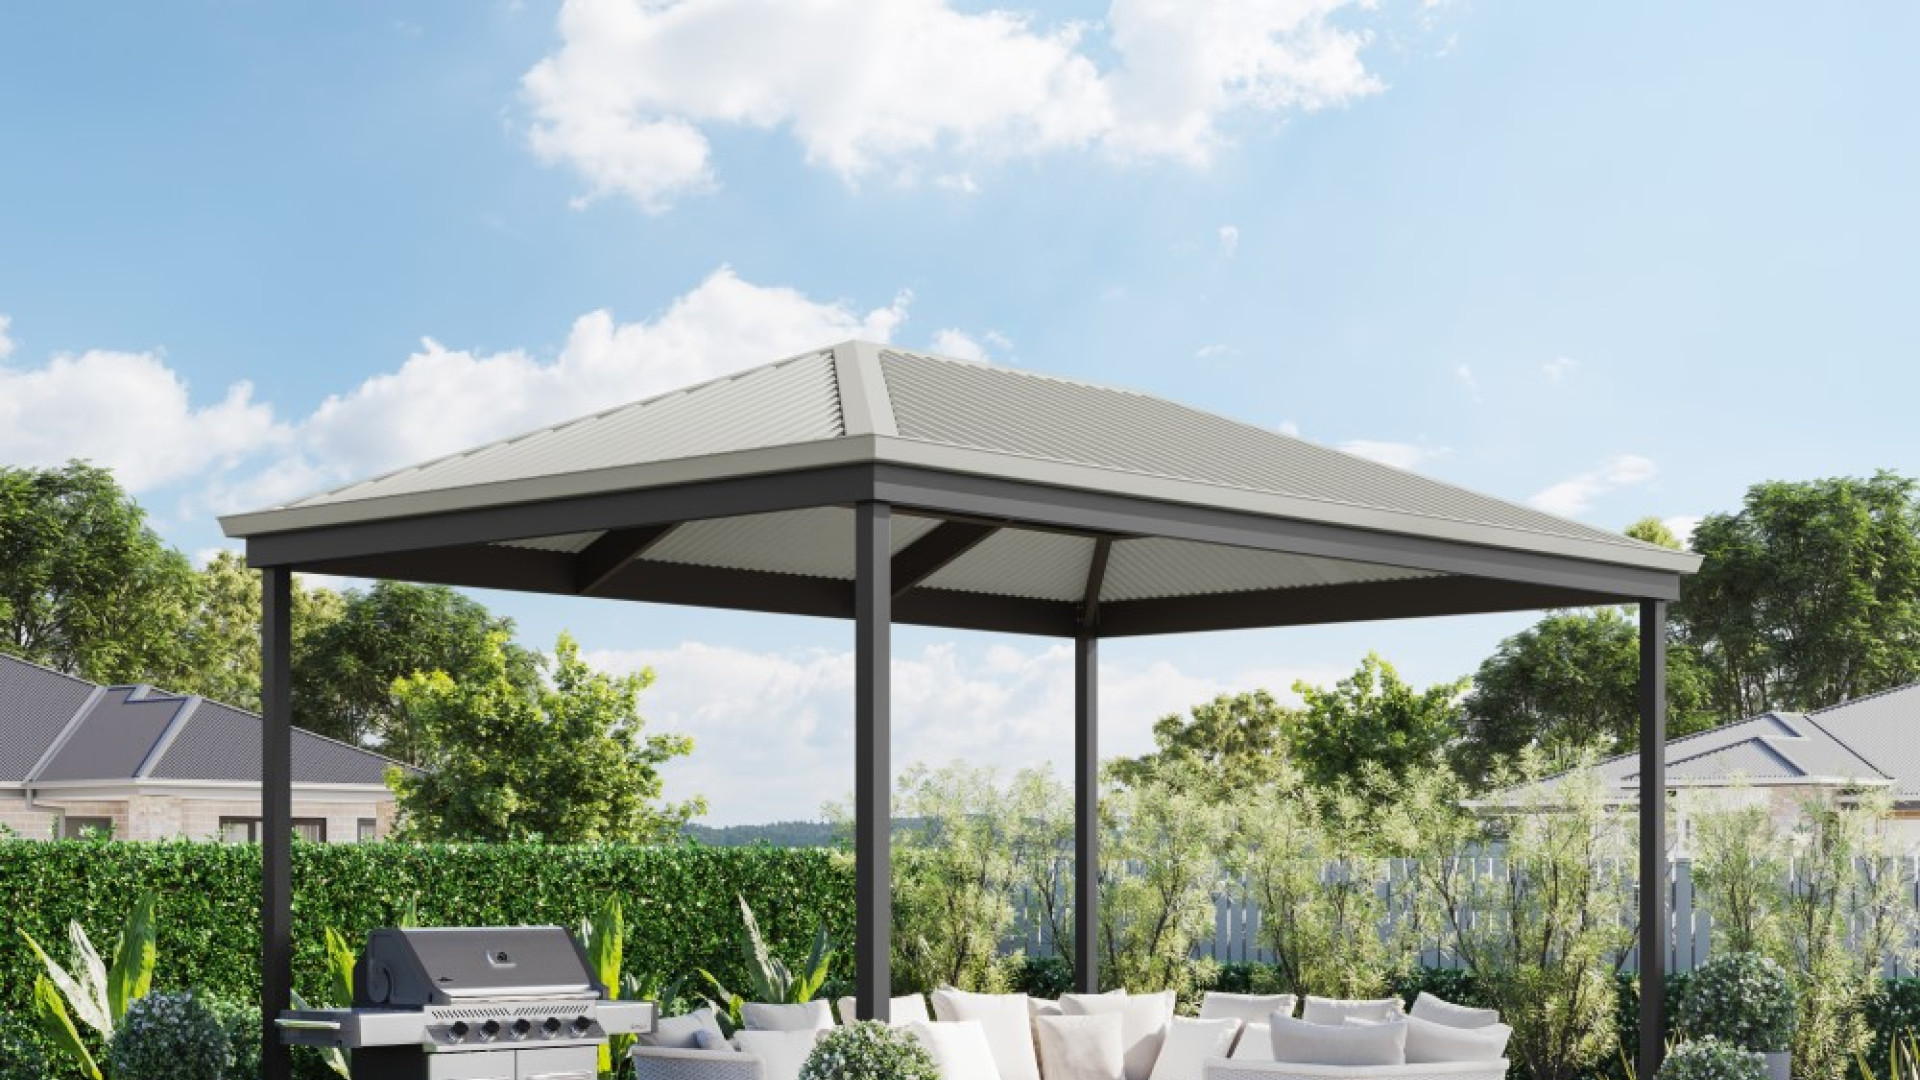 A hipped roof pergola with wooden raised decking, a BBQ and a white outdoor furniture setting